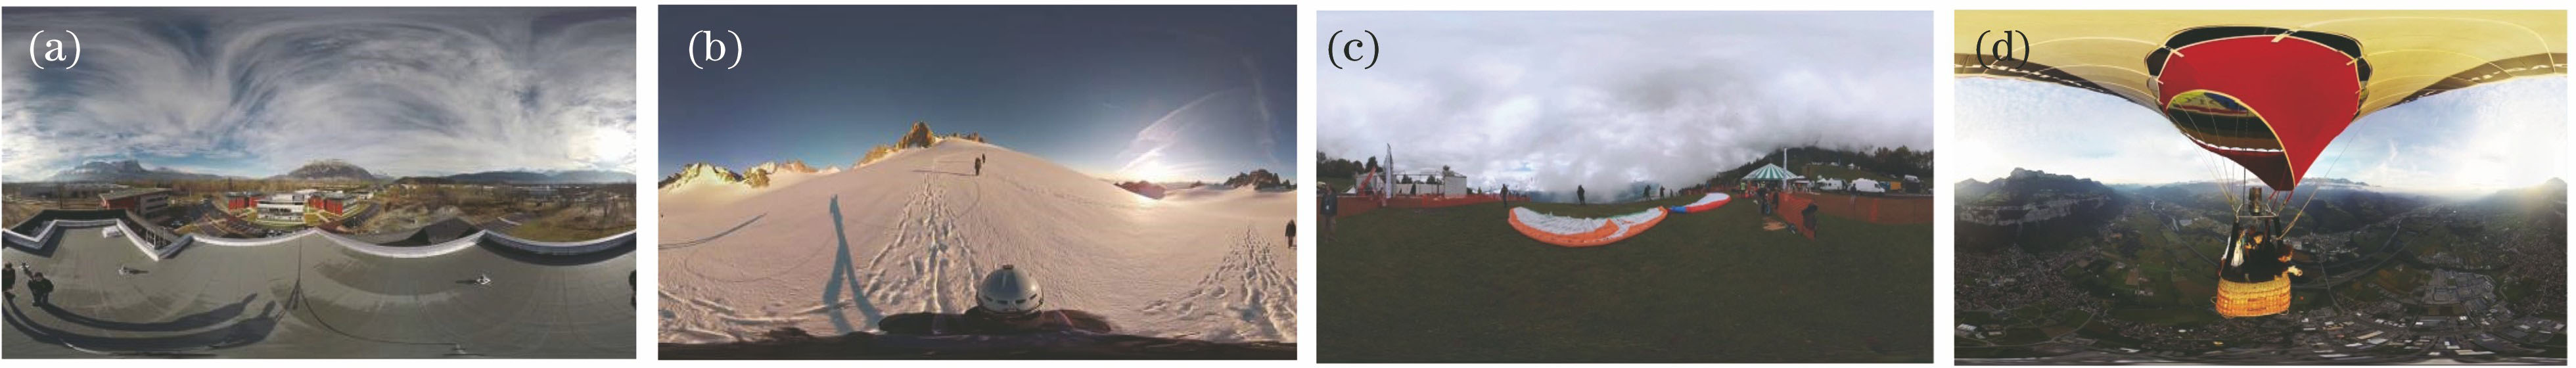 360° image sequences. (a) Building sequence for camera fixed; (b) glacier sequence for camera not fixed; (c) jump sequence for camera fixed; (d) ballooning sequence for camera not fixed